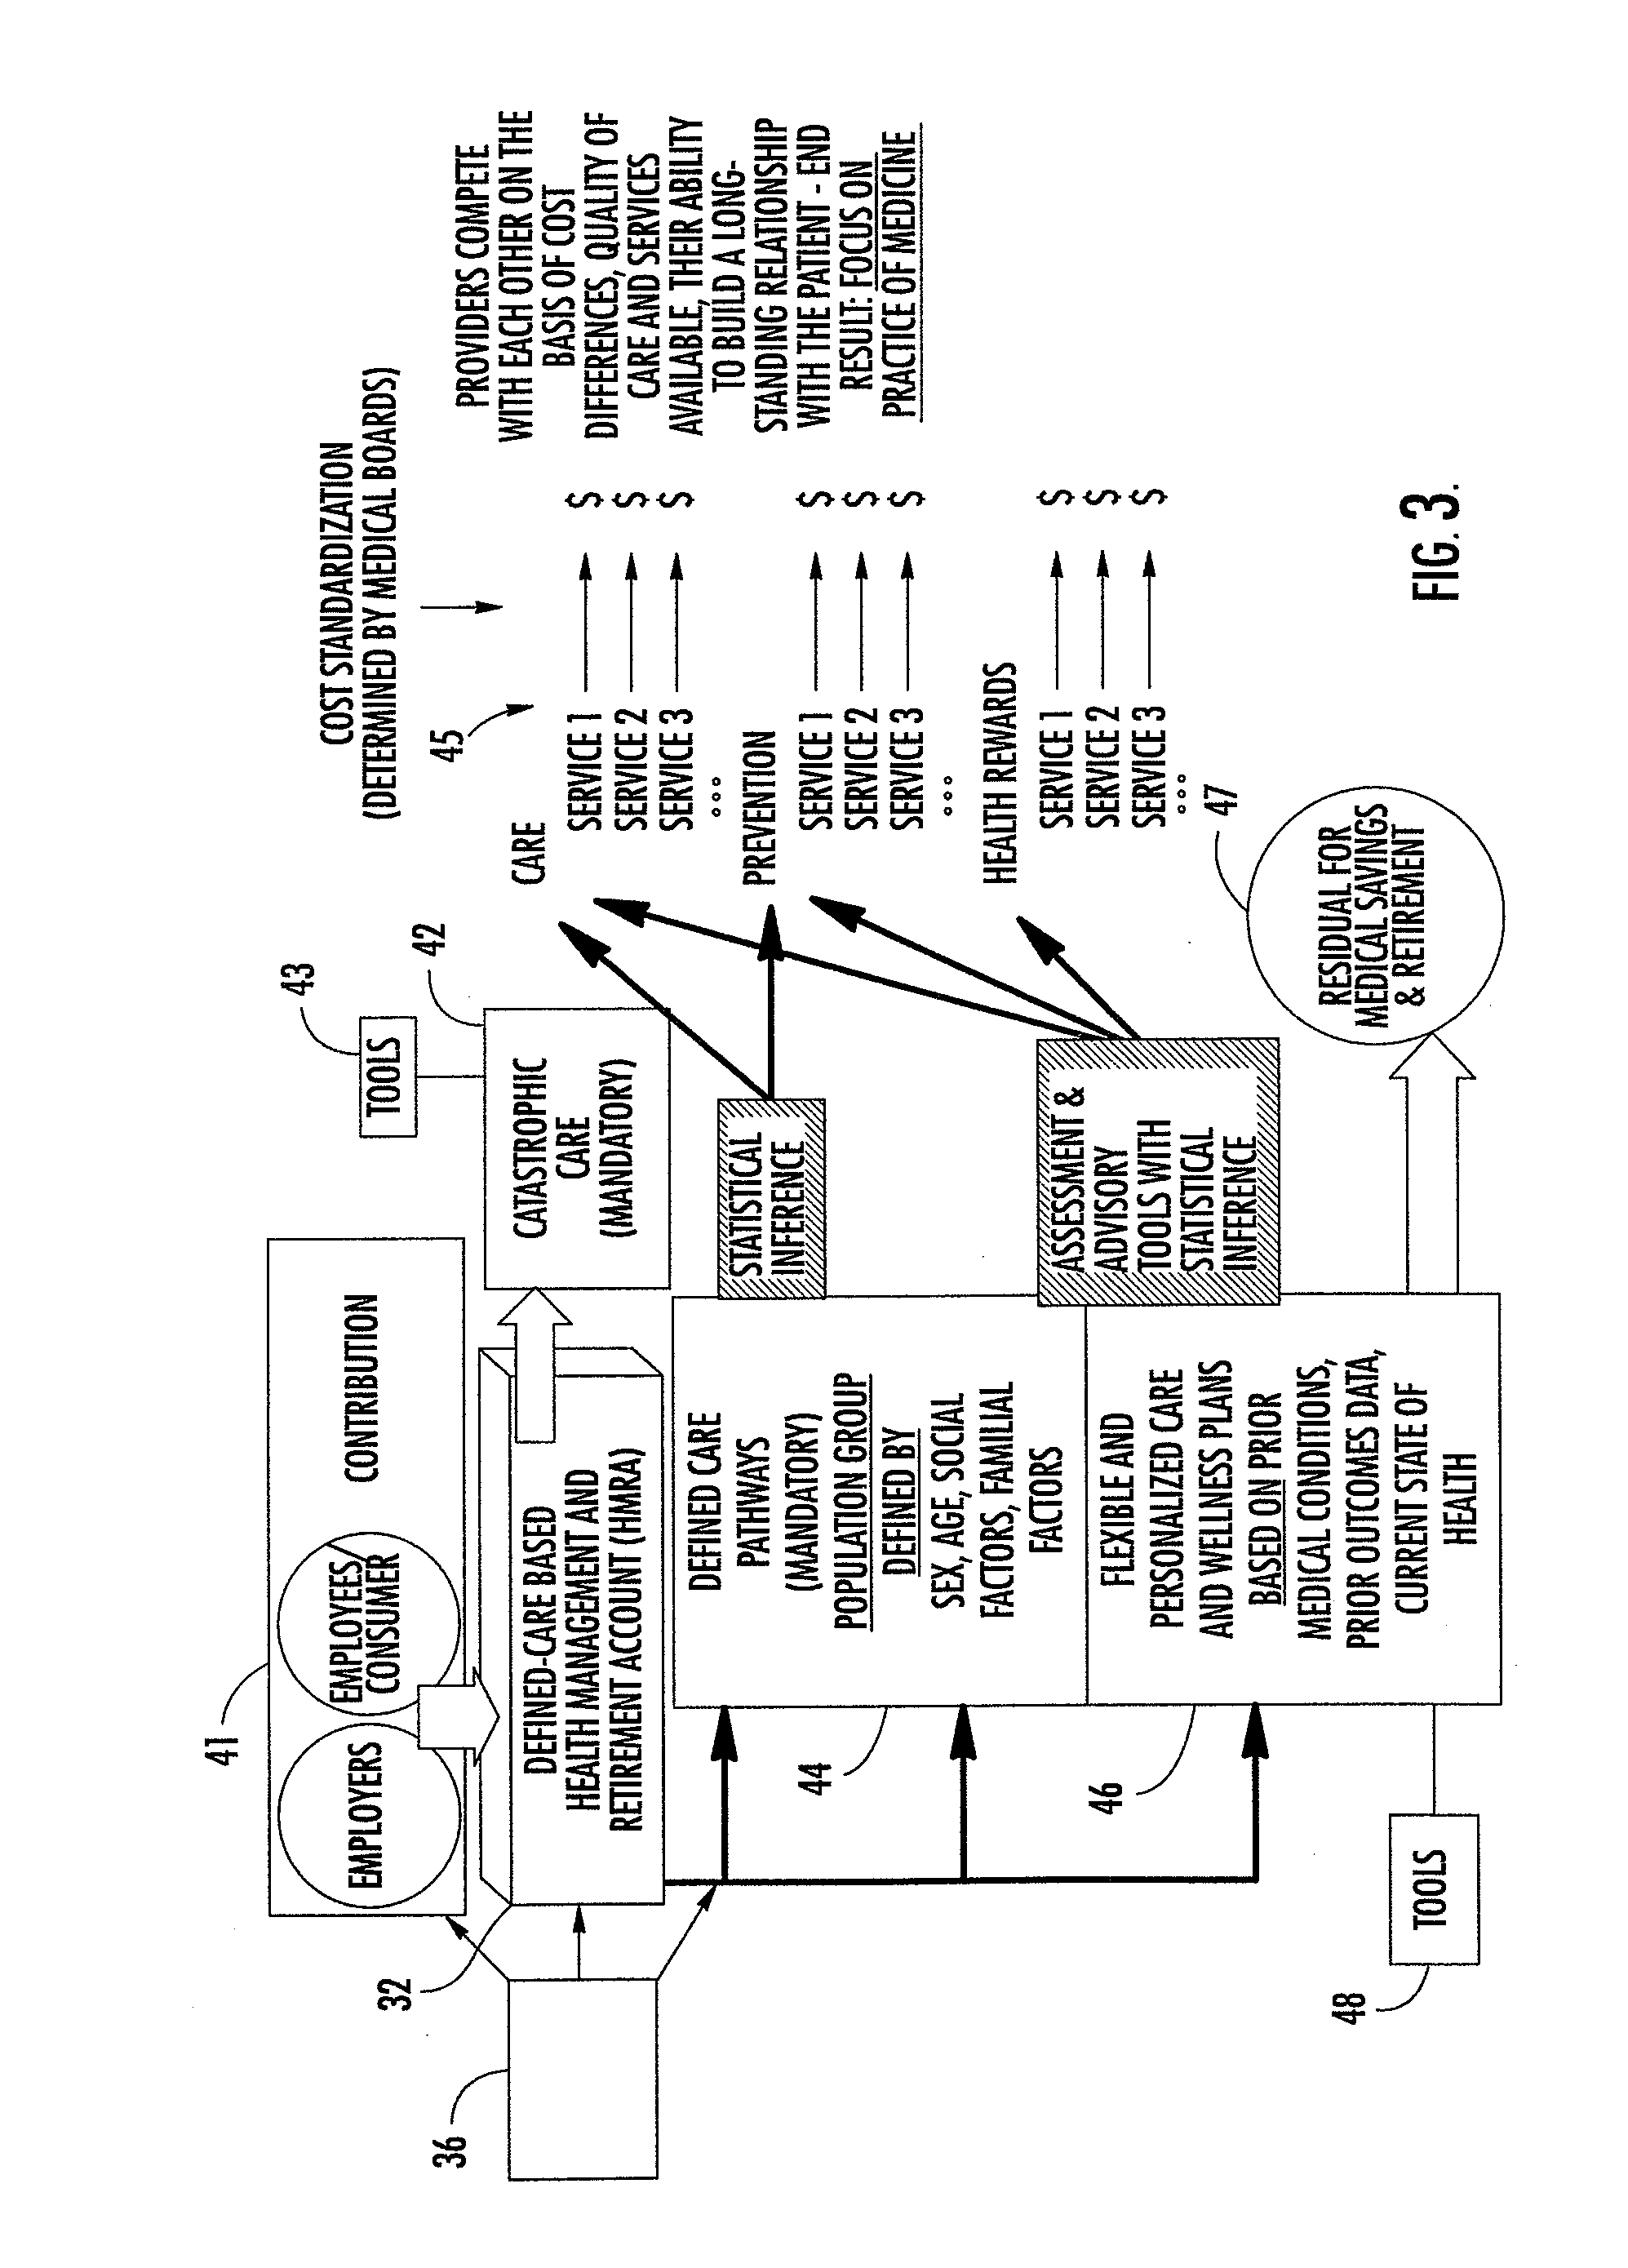 System and method for management of health care services